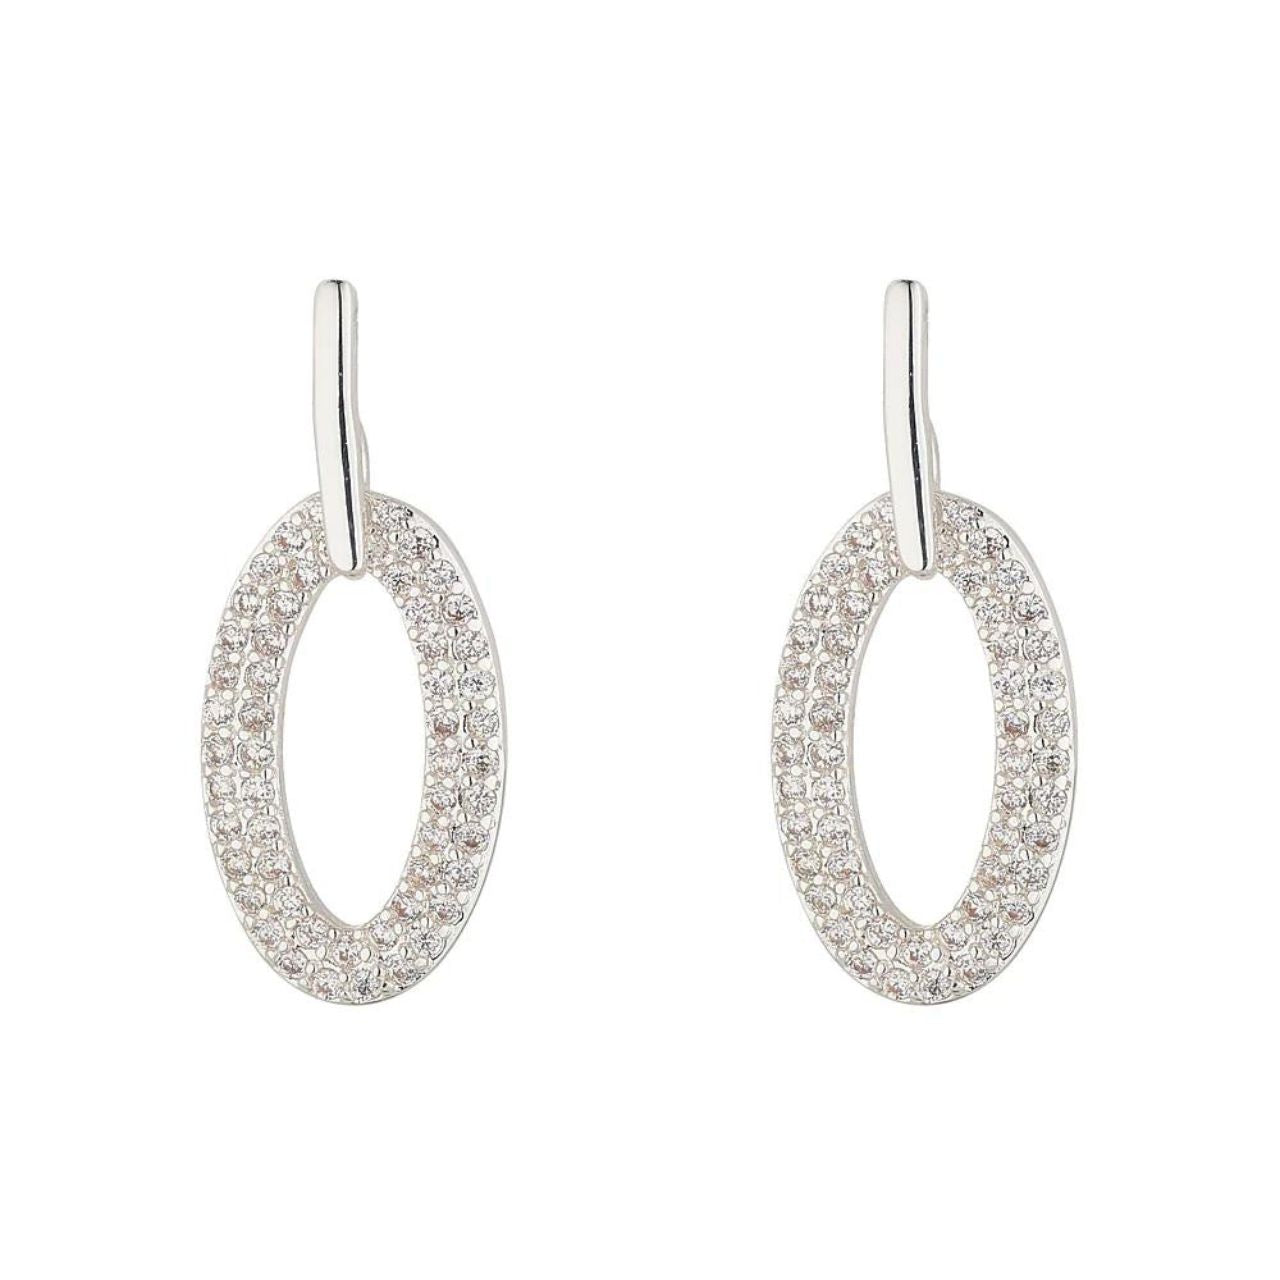 Silver Oval Drop Earrings by Knight & Day  These silver-plated oval drop earrings are a stylish and sophisticated choice to elevate any look.